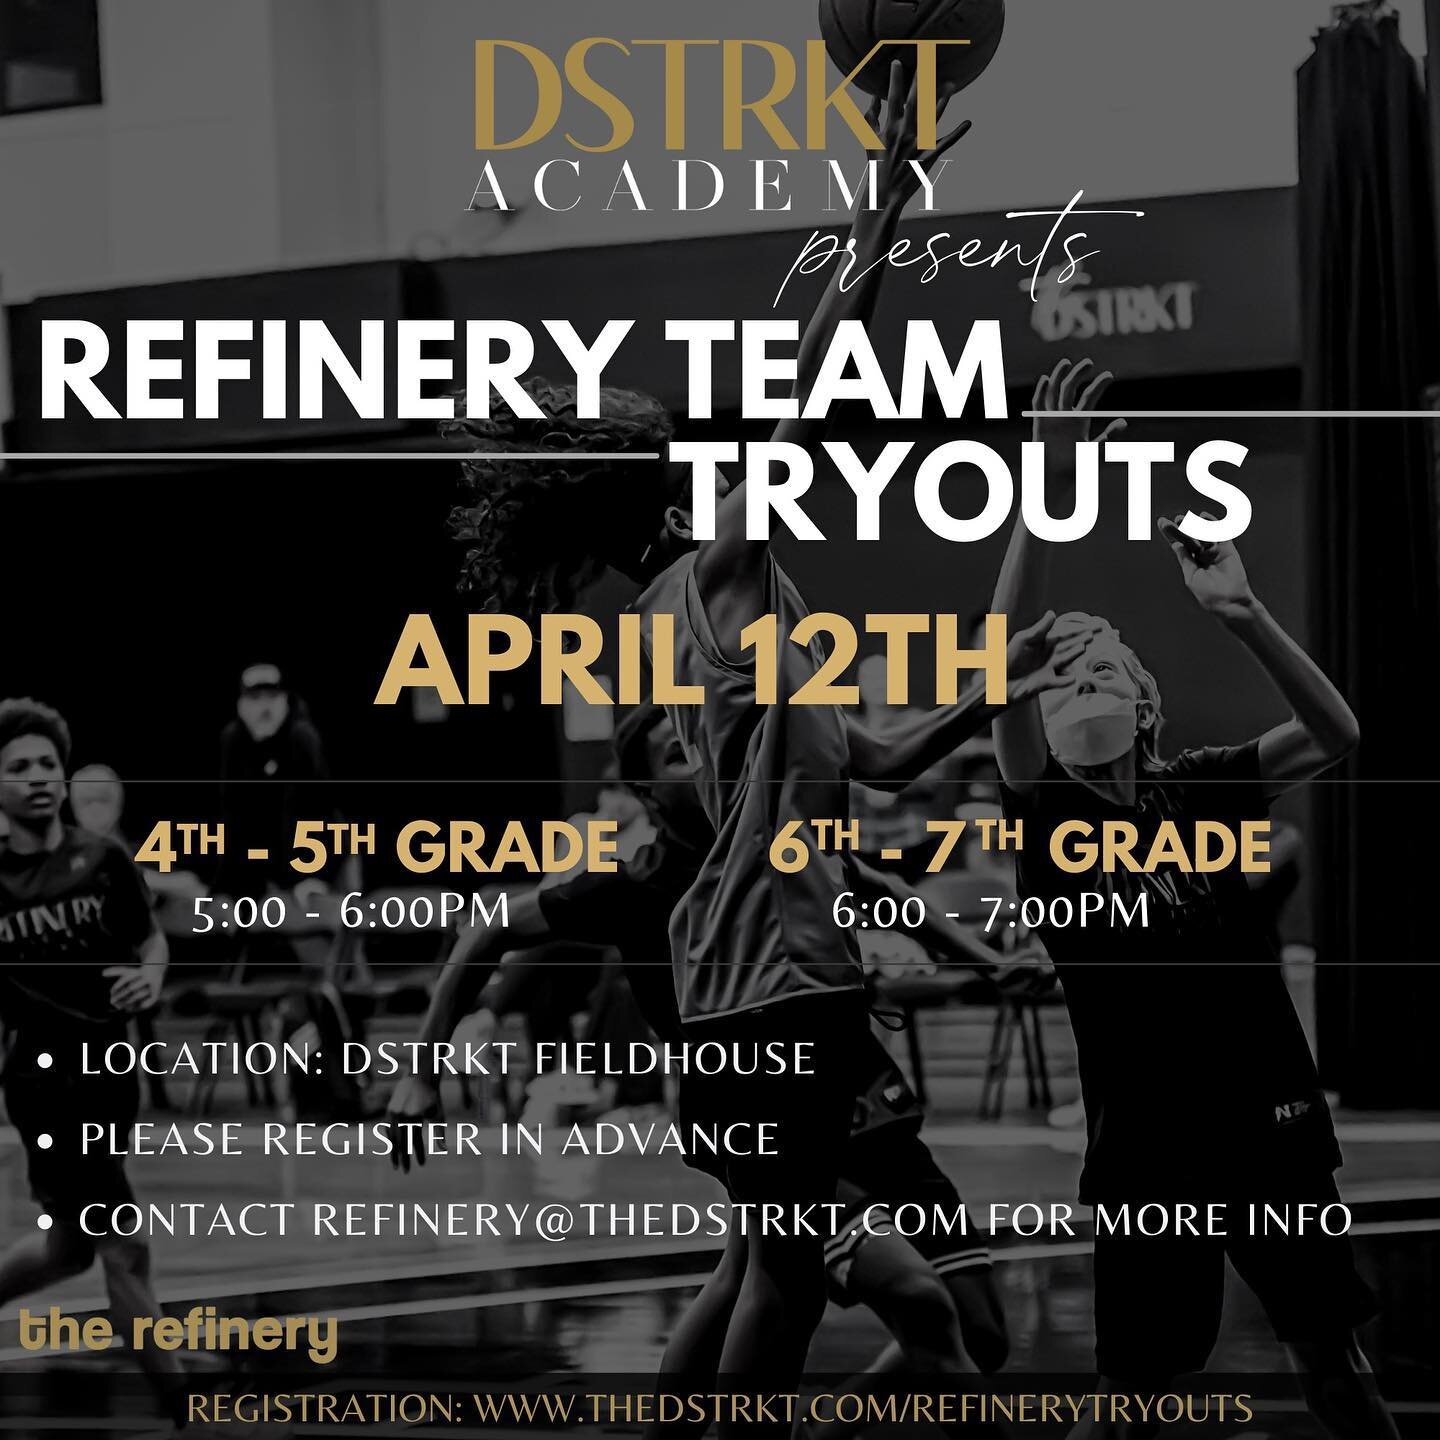 Next Wednesday the 12th, @dstrktacademy is holding tryouts for their Refinery teams right here at DSTRKT Fieldhouse. 

4th-7th grade!! 

Click the link in our bio to register. #runnit 

#dstrkt #thedstrkt #basketball #basketballtraining #personaltrai